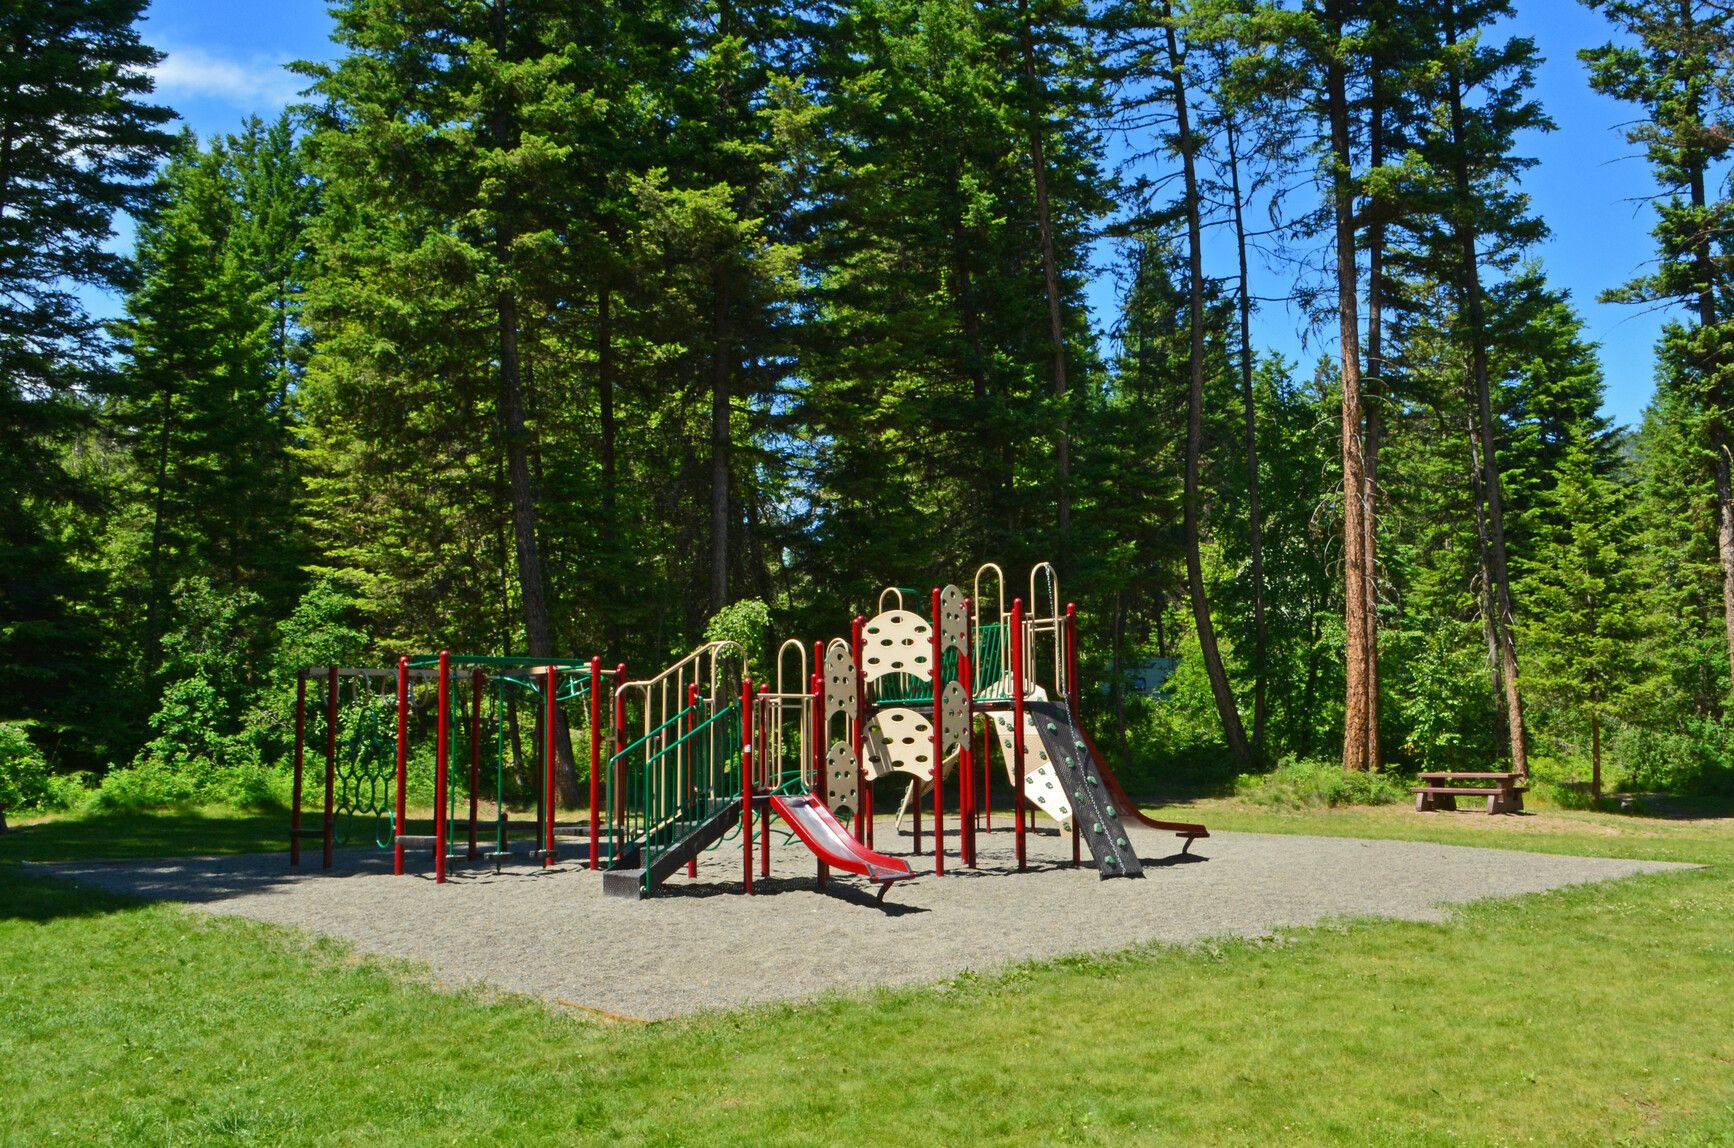 A charming playground area nestled within the forest at Paul Lake Park, providing a fun and natural setting for children to play.